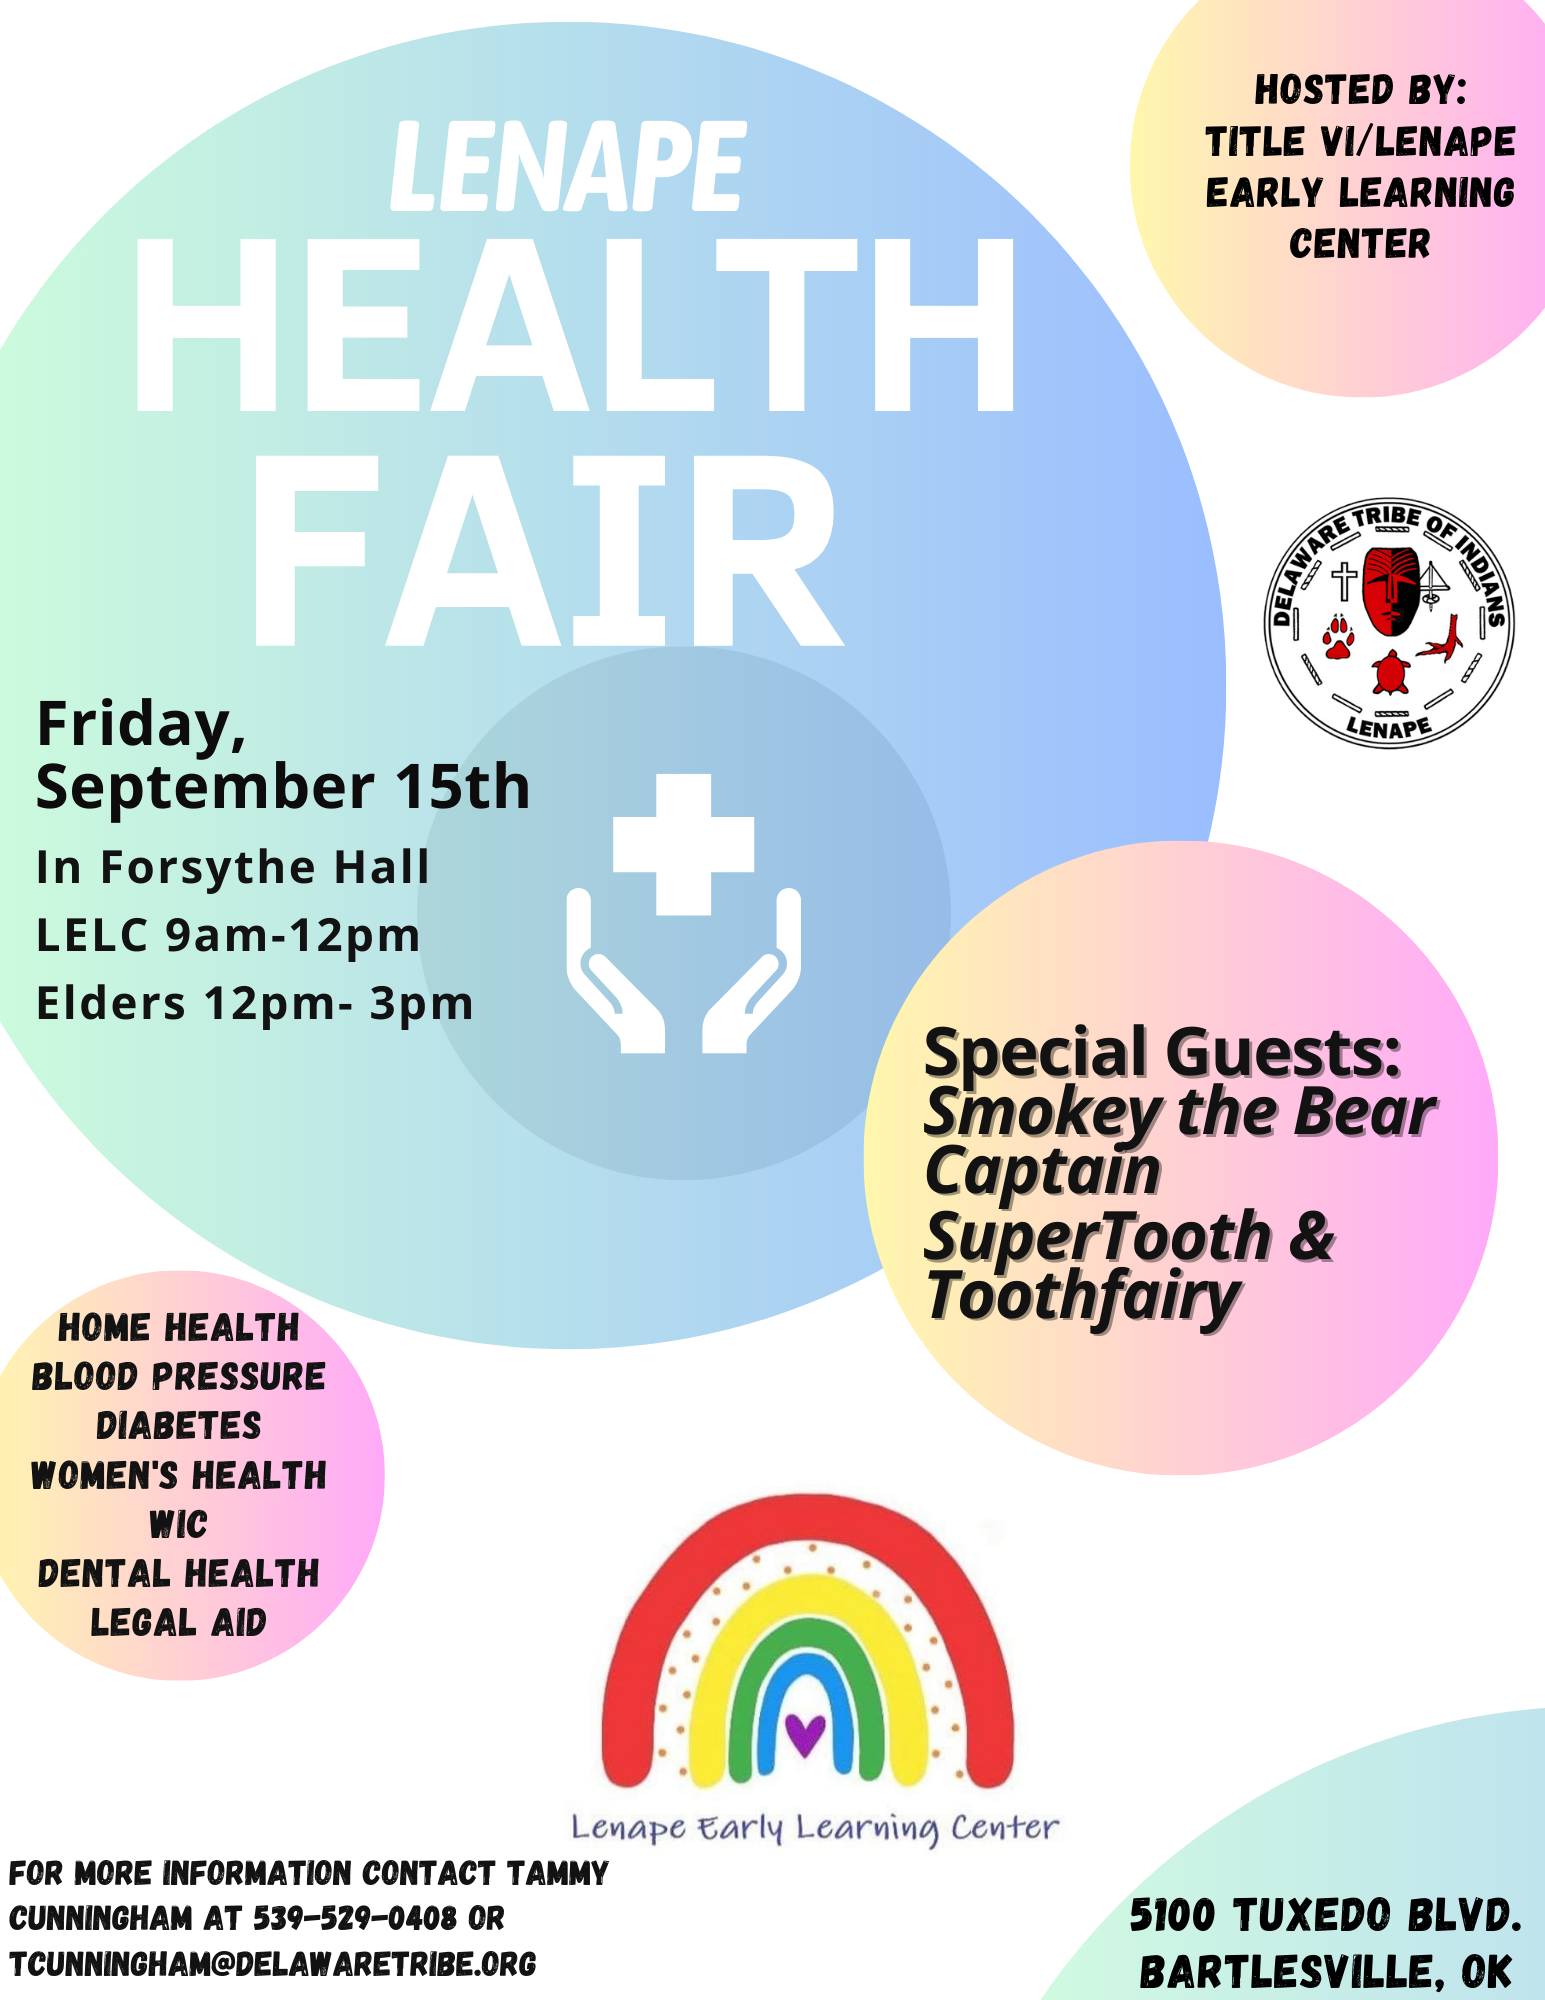 The Delaware Tribe of Indians Title VI Program and the Lenape Early Learning Center will be holding a Lenape Health Fair at Forsythe Hall on Friday, September 15. For details, see the flyer below or contact Tracy Cunningham at (539) 529-0408 or tcunningham@delawaretribe.org